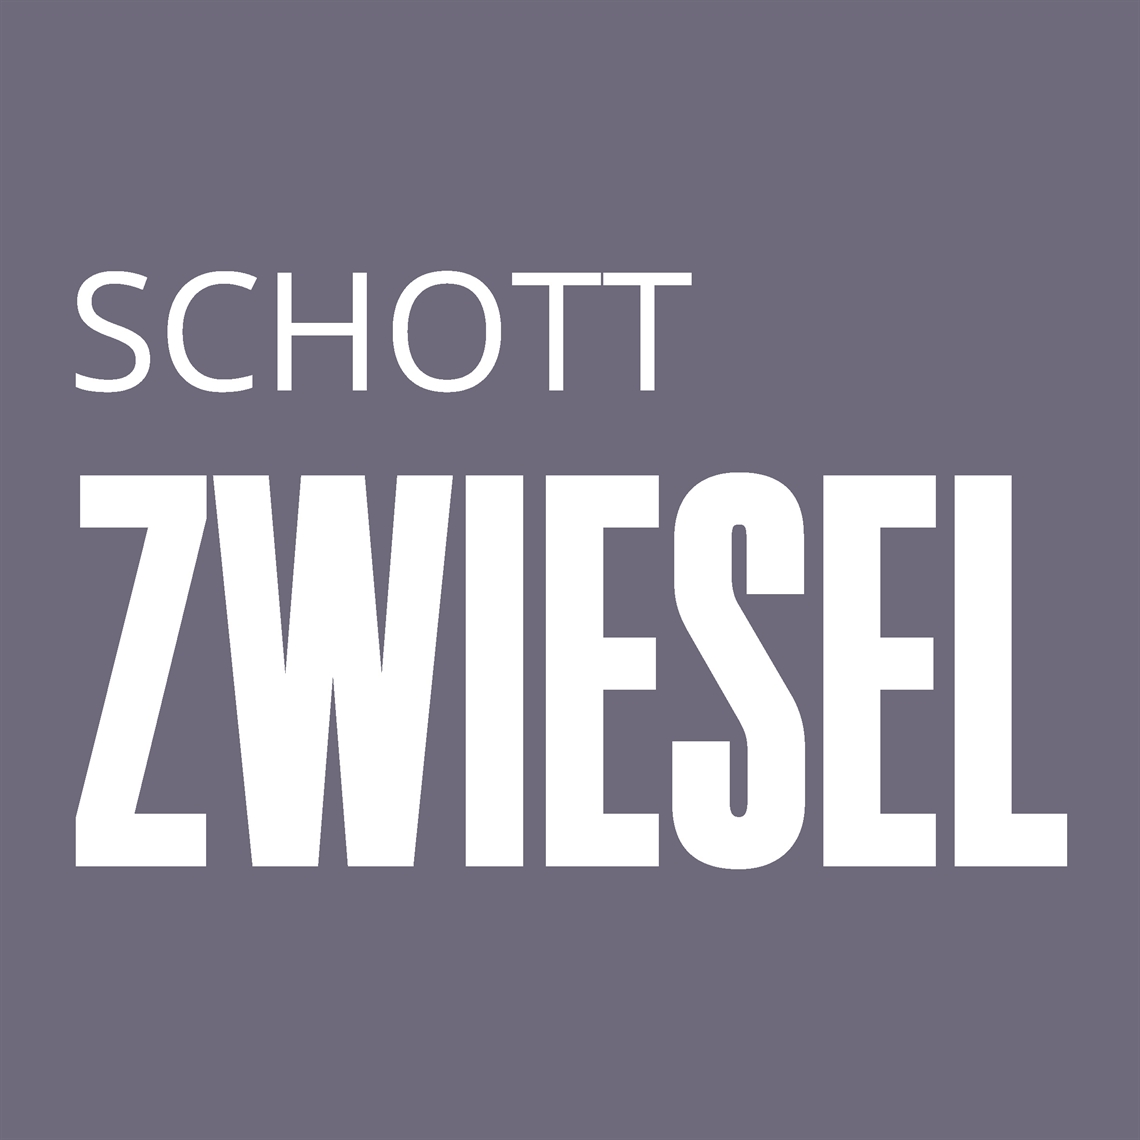 View our collection of Schott Zwiesel Wine Glasses